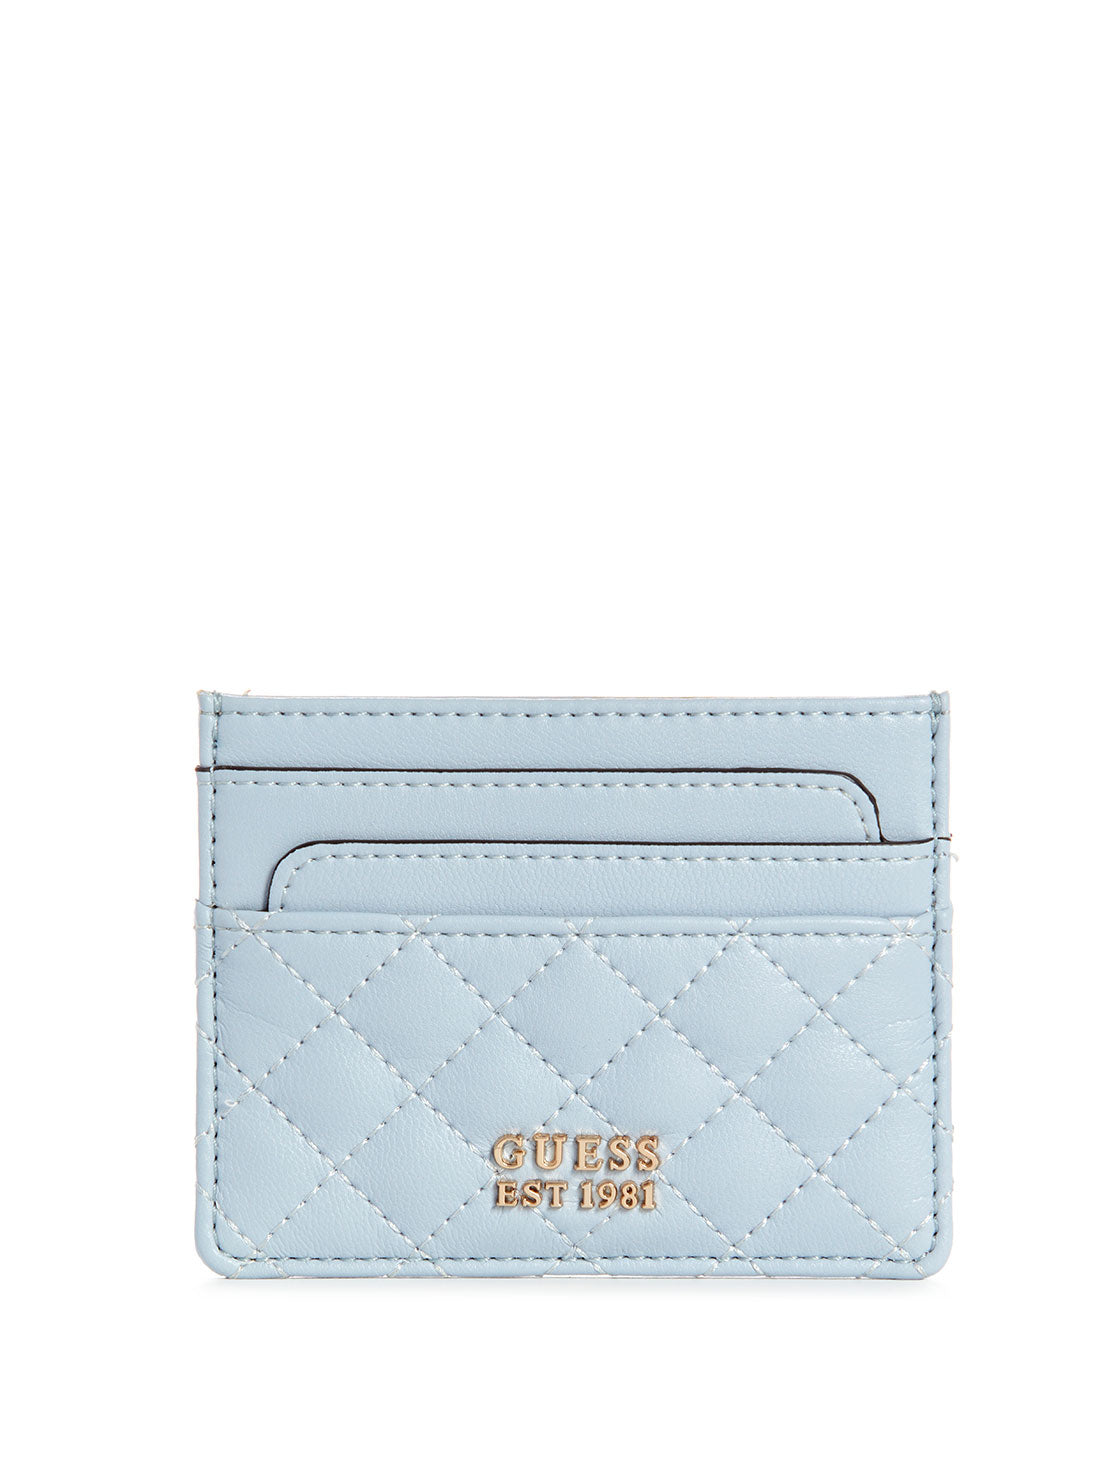 GUESS Sky Blue Rianee Card Holder front view